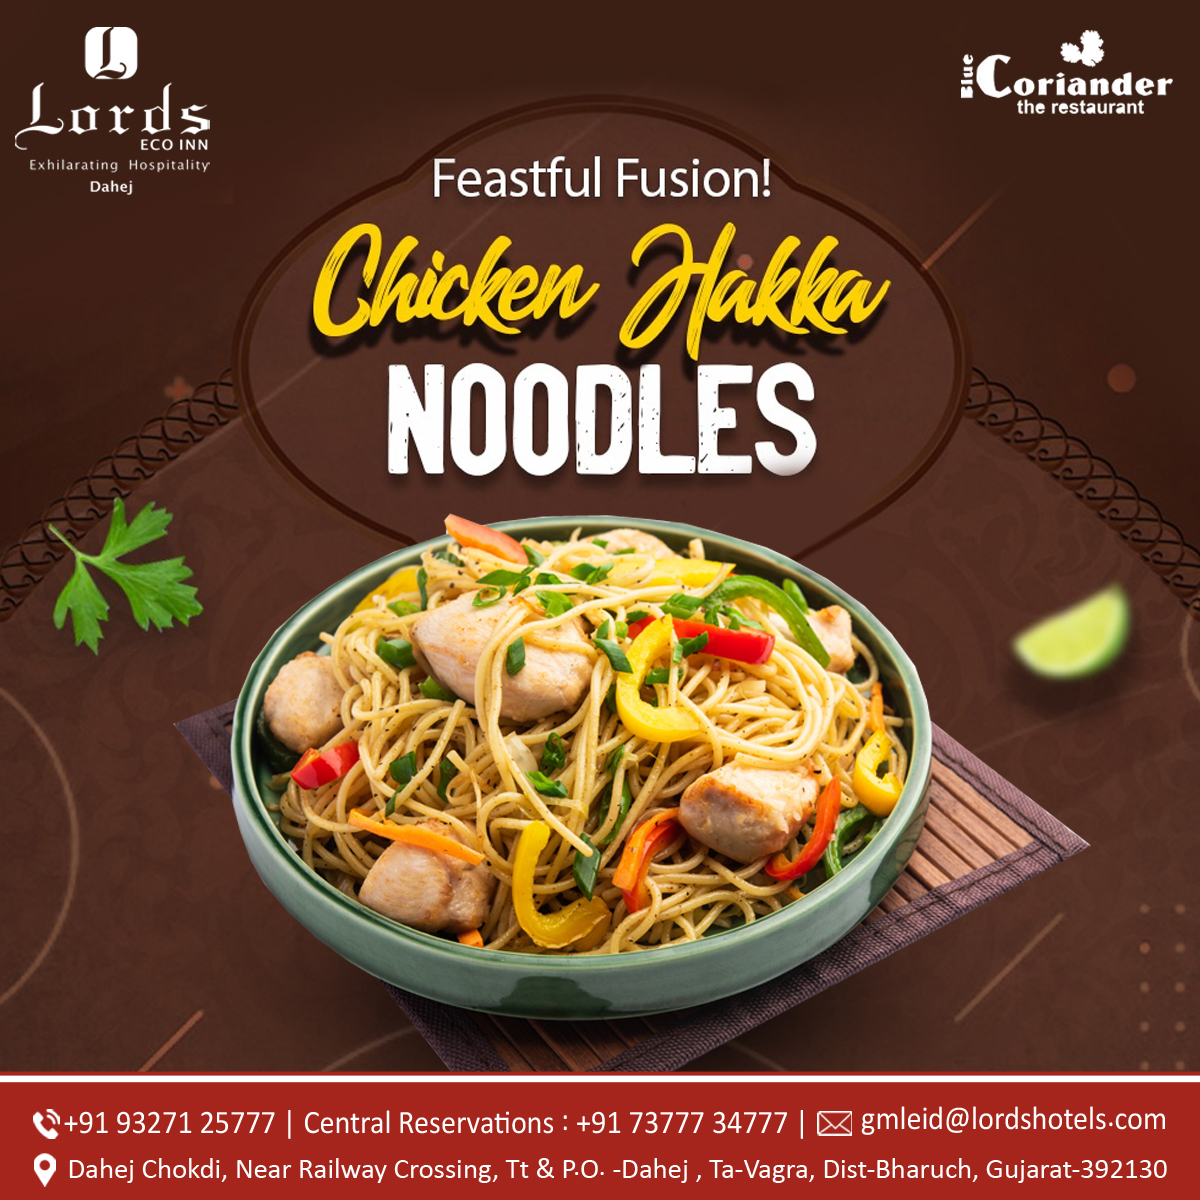 You have been missing Chicken Hakka Noodles for a long time? Lords Eco Inn Dahej is here to make sure you don't miss it anymore. We serve the best chicken Hakka Noodles.

#chickenhakkanoodles #noodles #hakkanoodles #hakkanoodlesrecipe